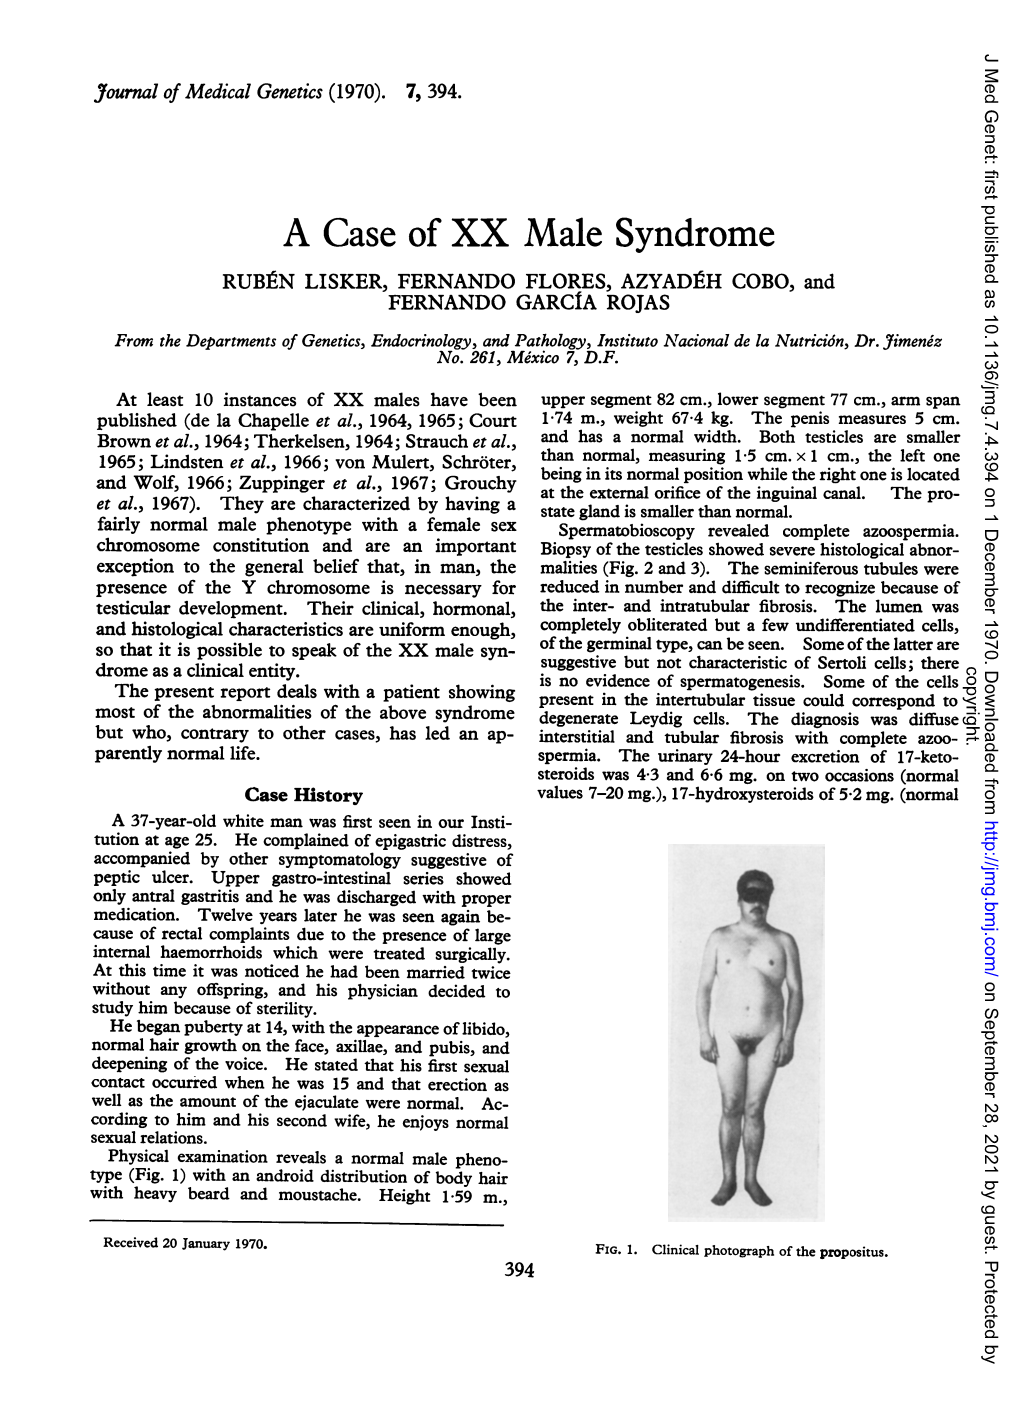 A Case of XX Male Syndrome